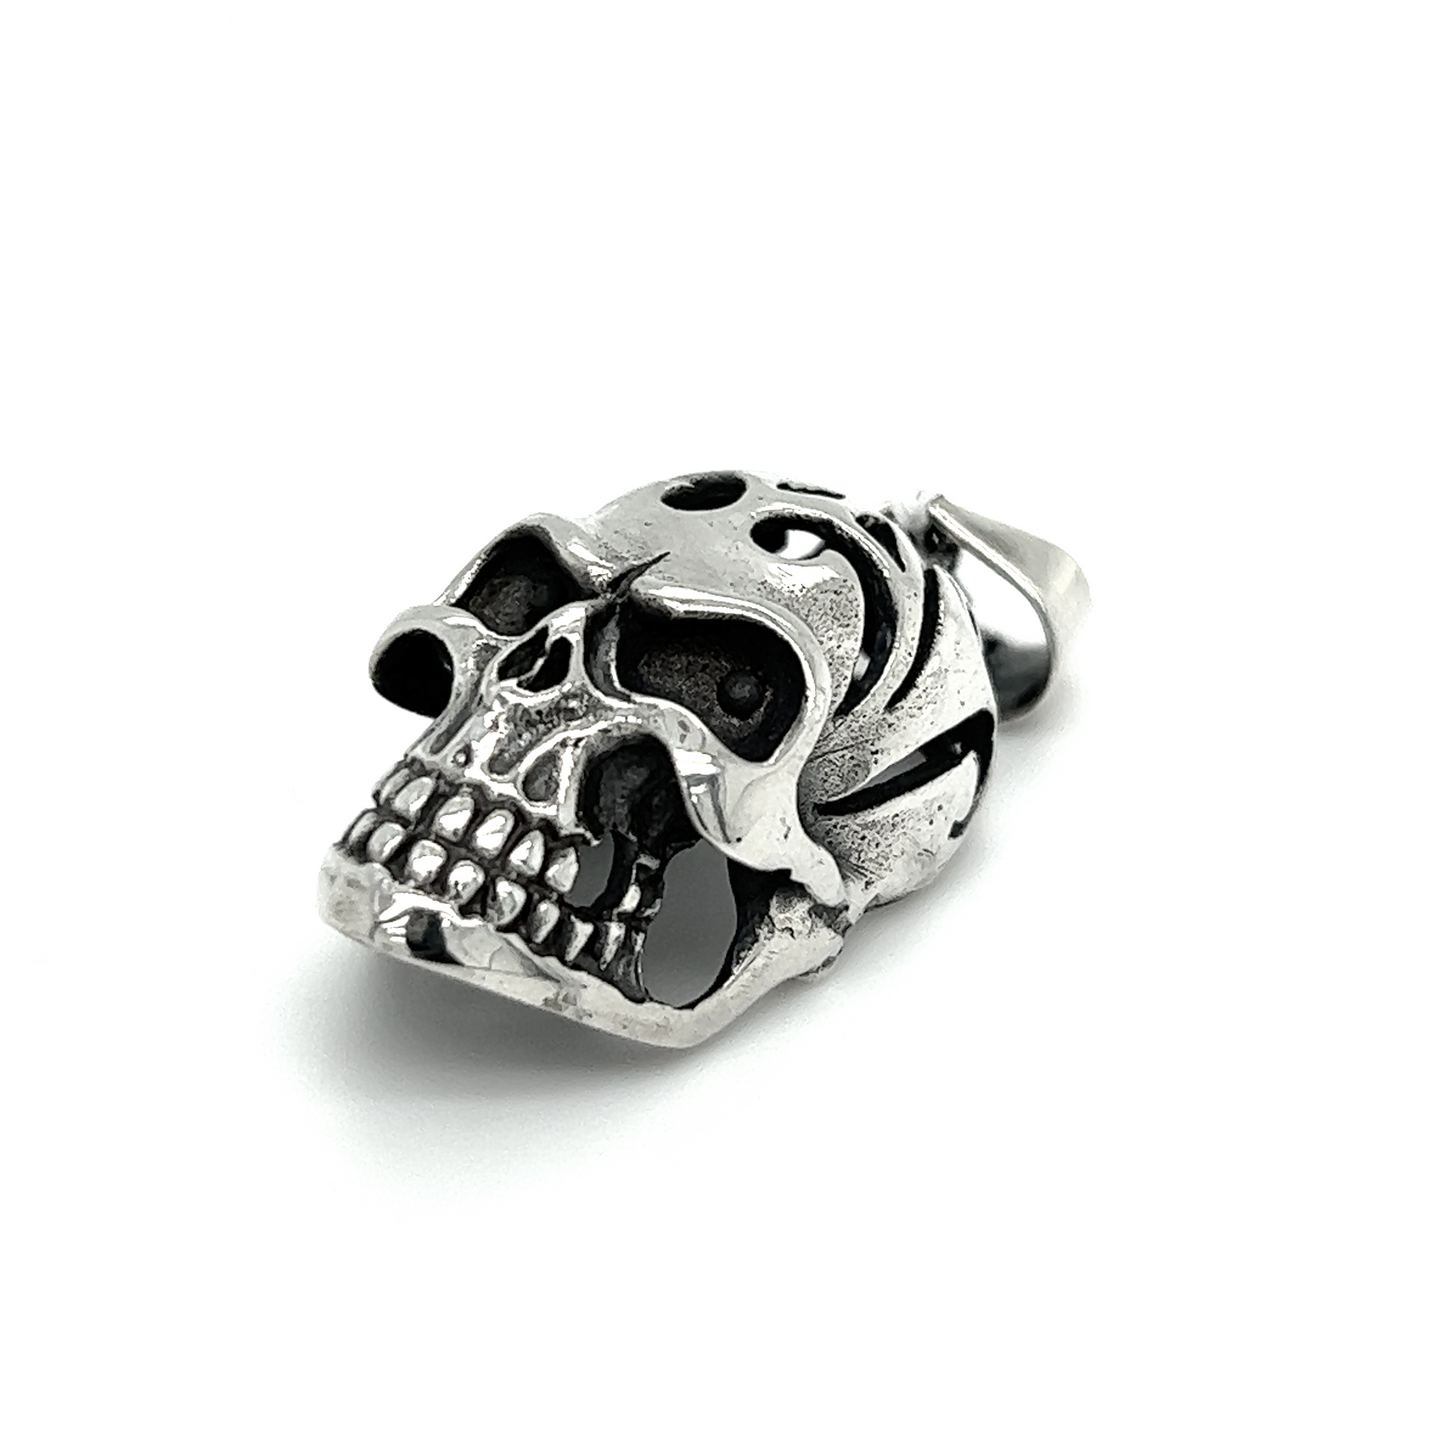 
                  
                    A distinctive Super Silver skull pendant with an oxidized finish and swirl design, displayed on a white background.
                  
                